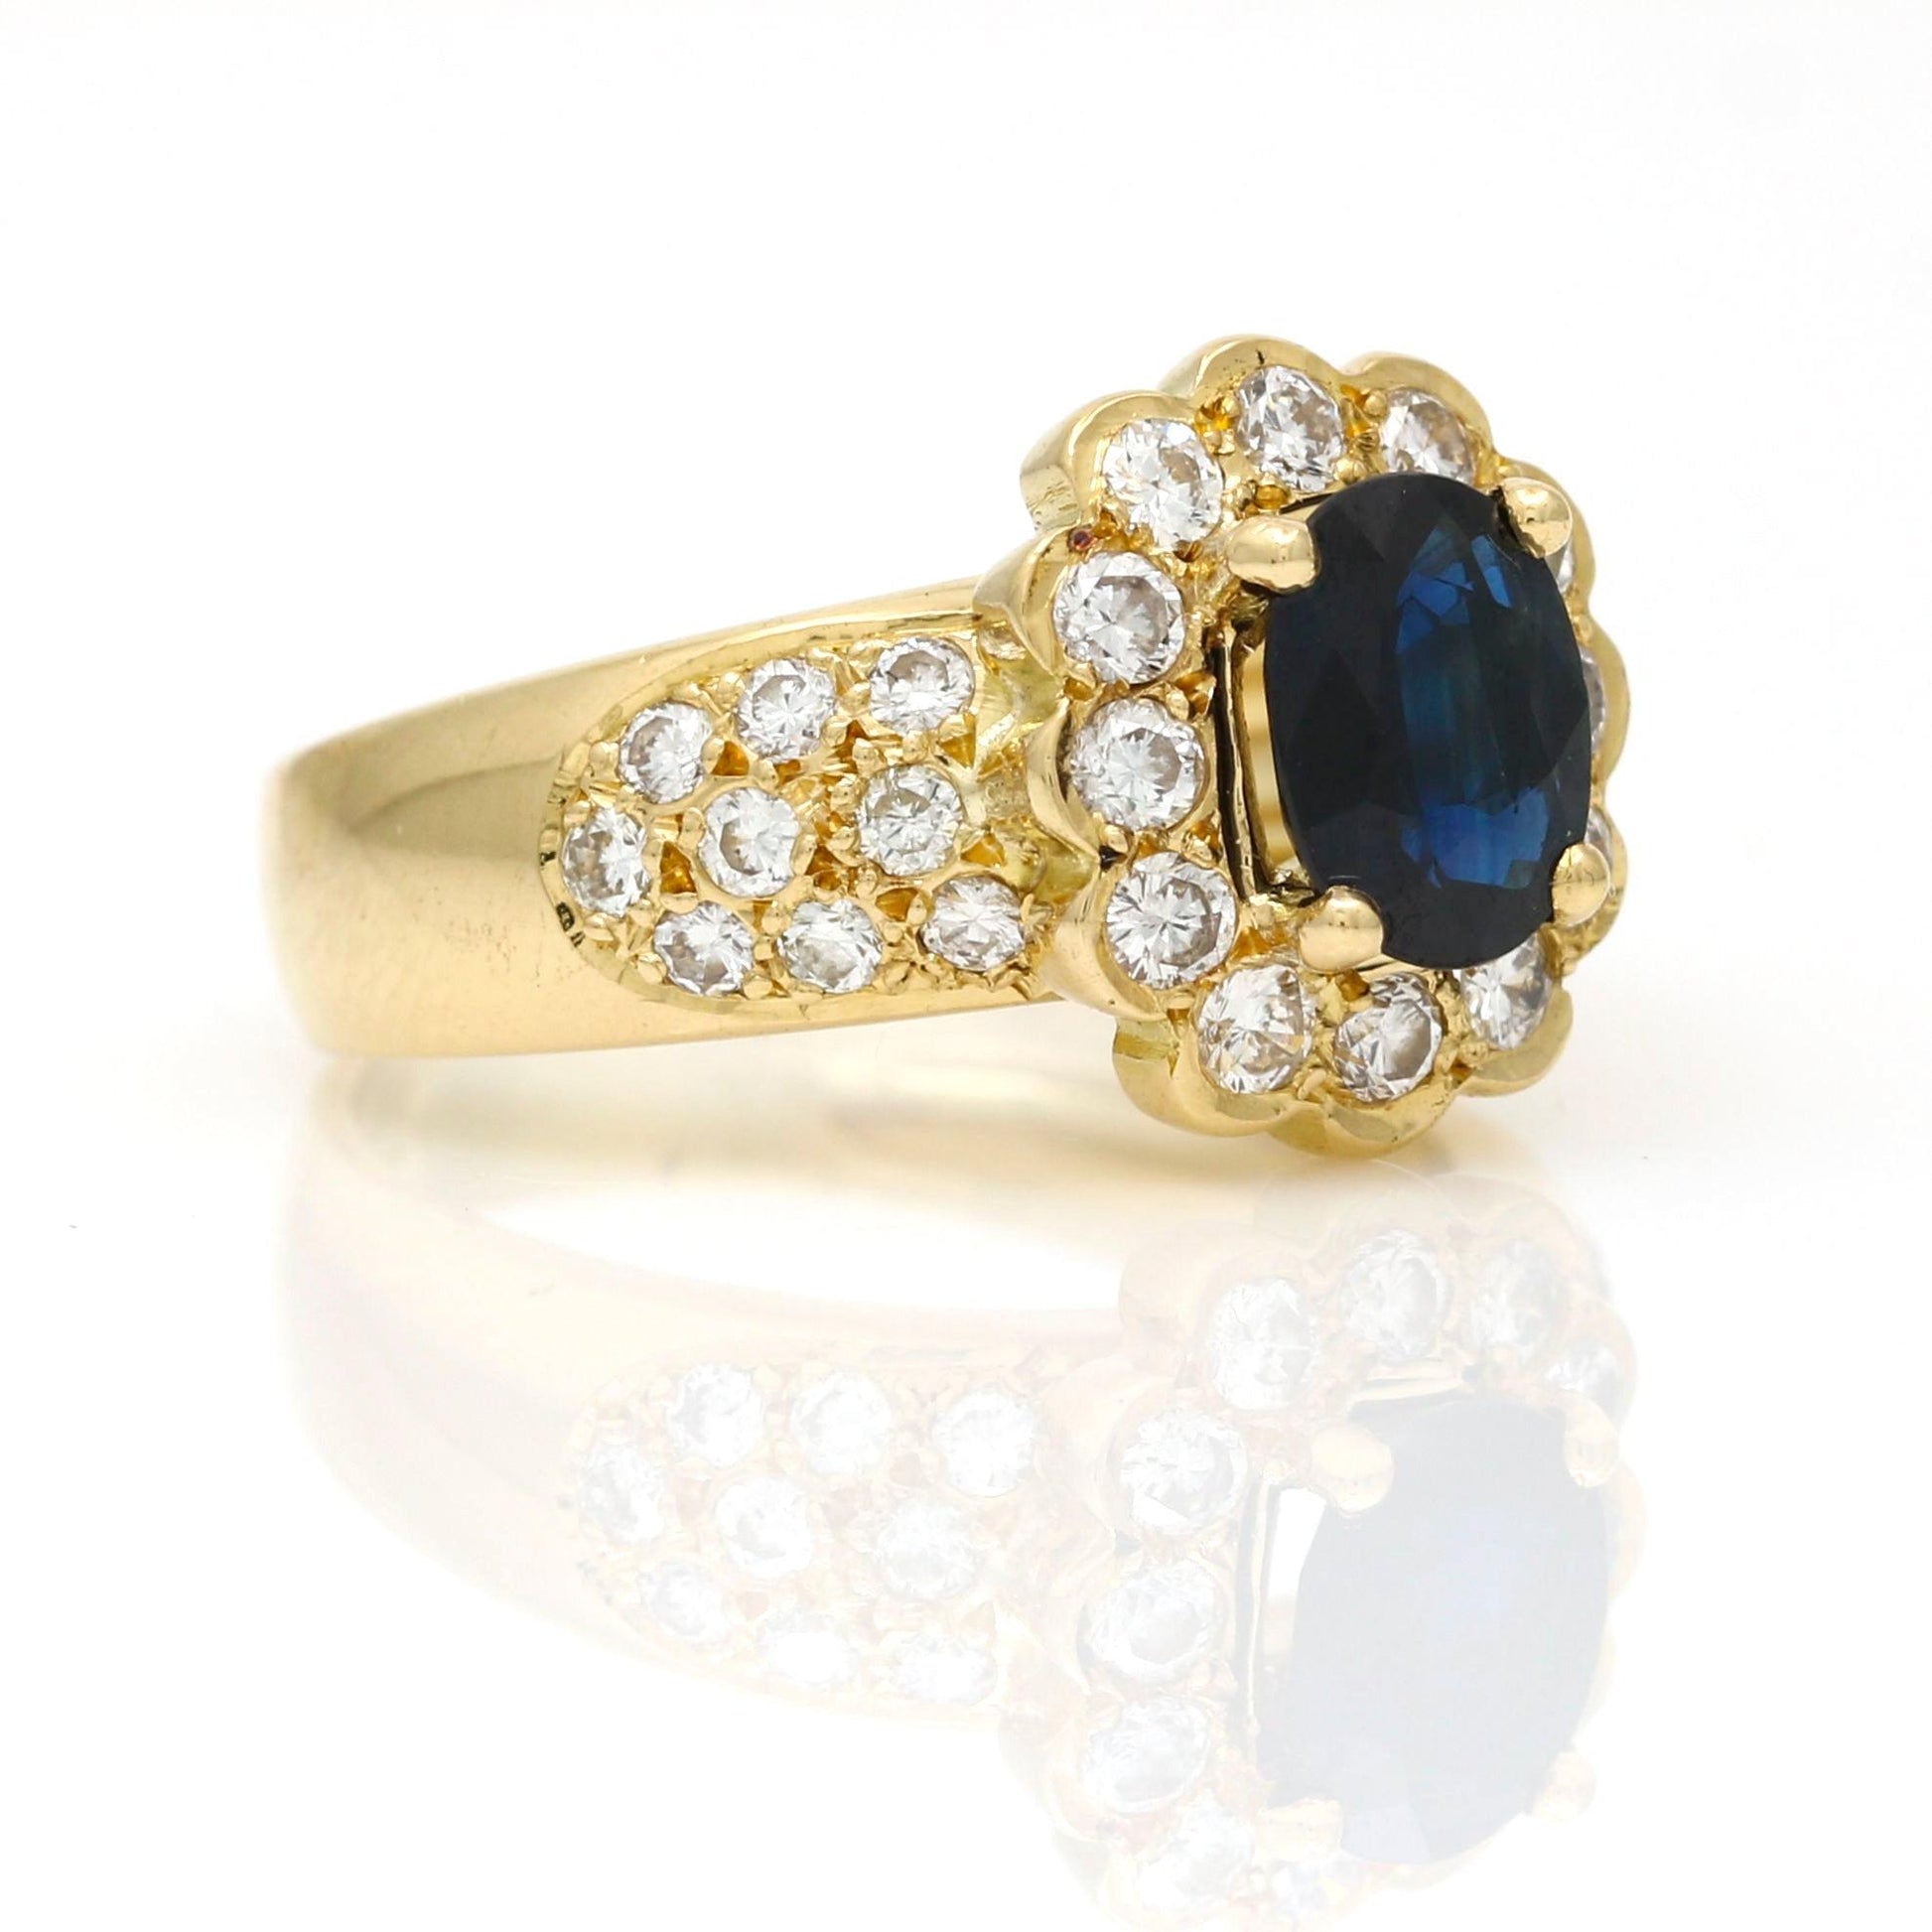 Vintage Blue Sapphire and Diamond Cocktail Ring in 18k Yellow Gold - 31 Jewels Inc.